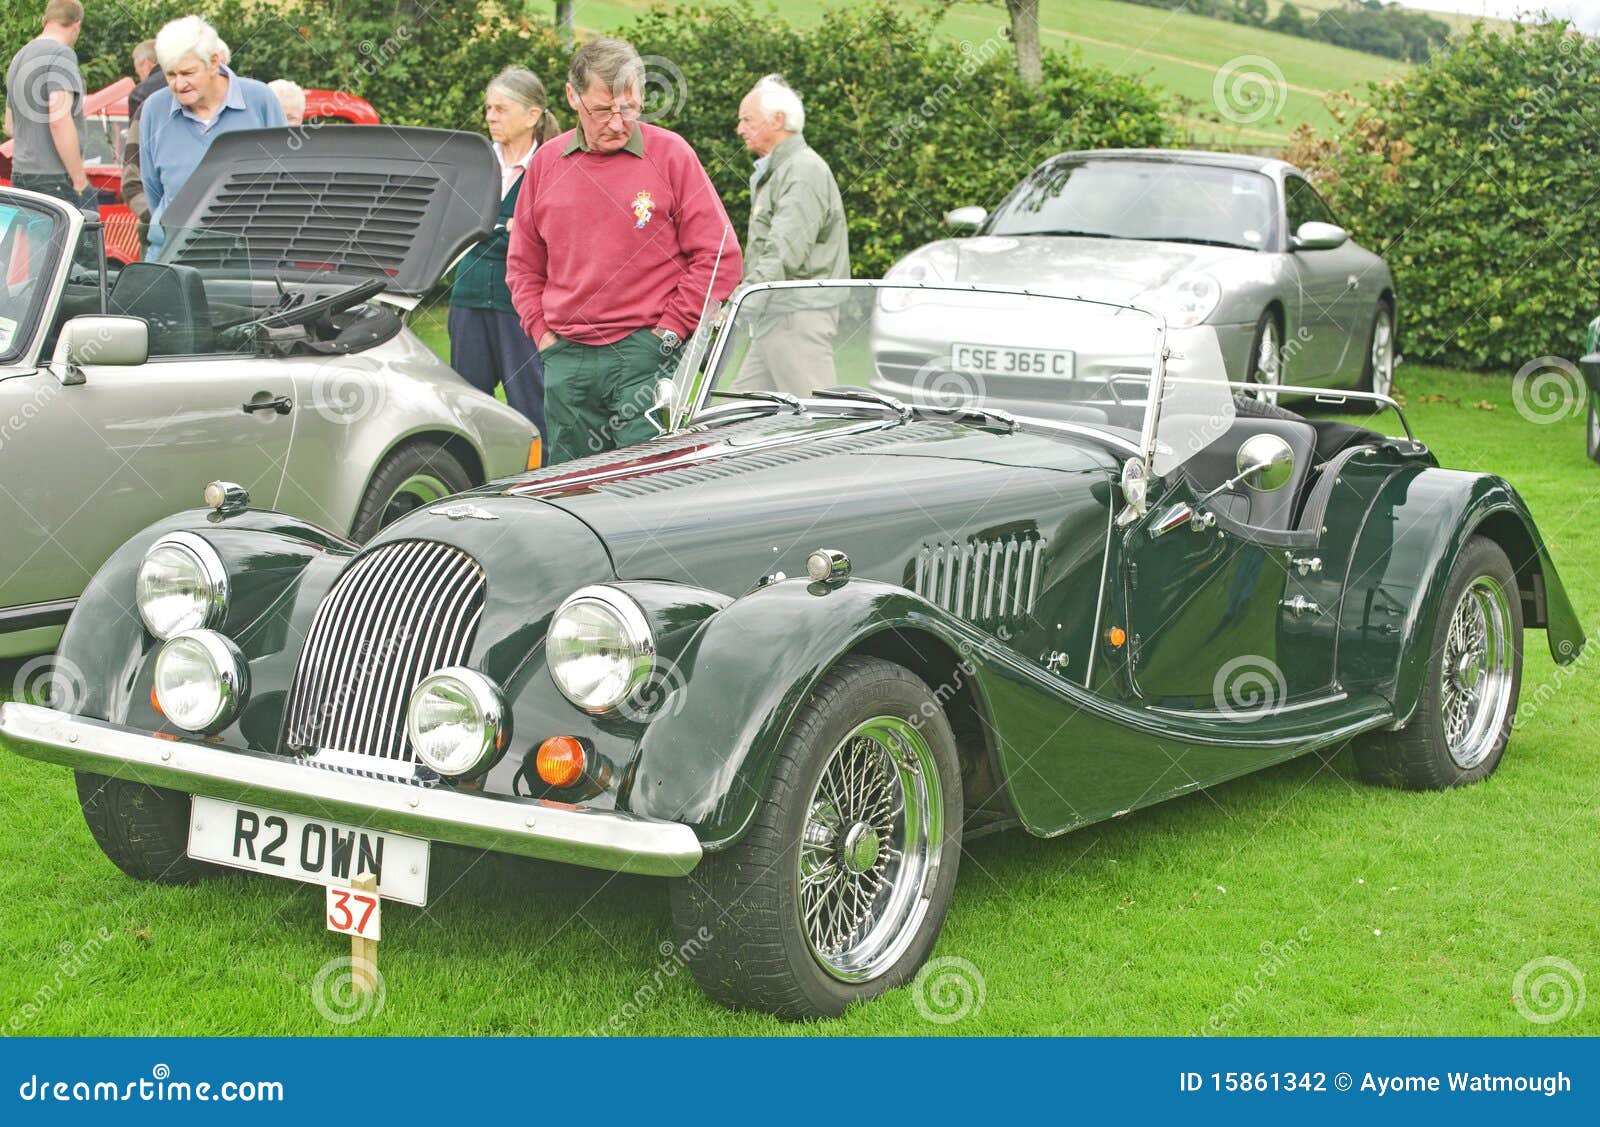 An image of a Morgan Classic car displayed at the Fortrose Classic Car 